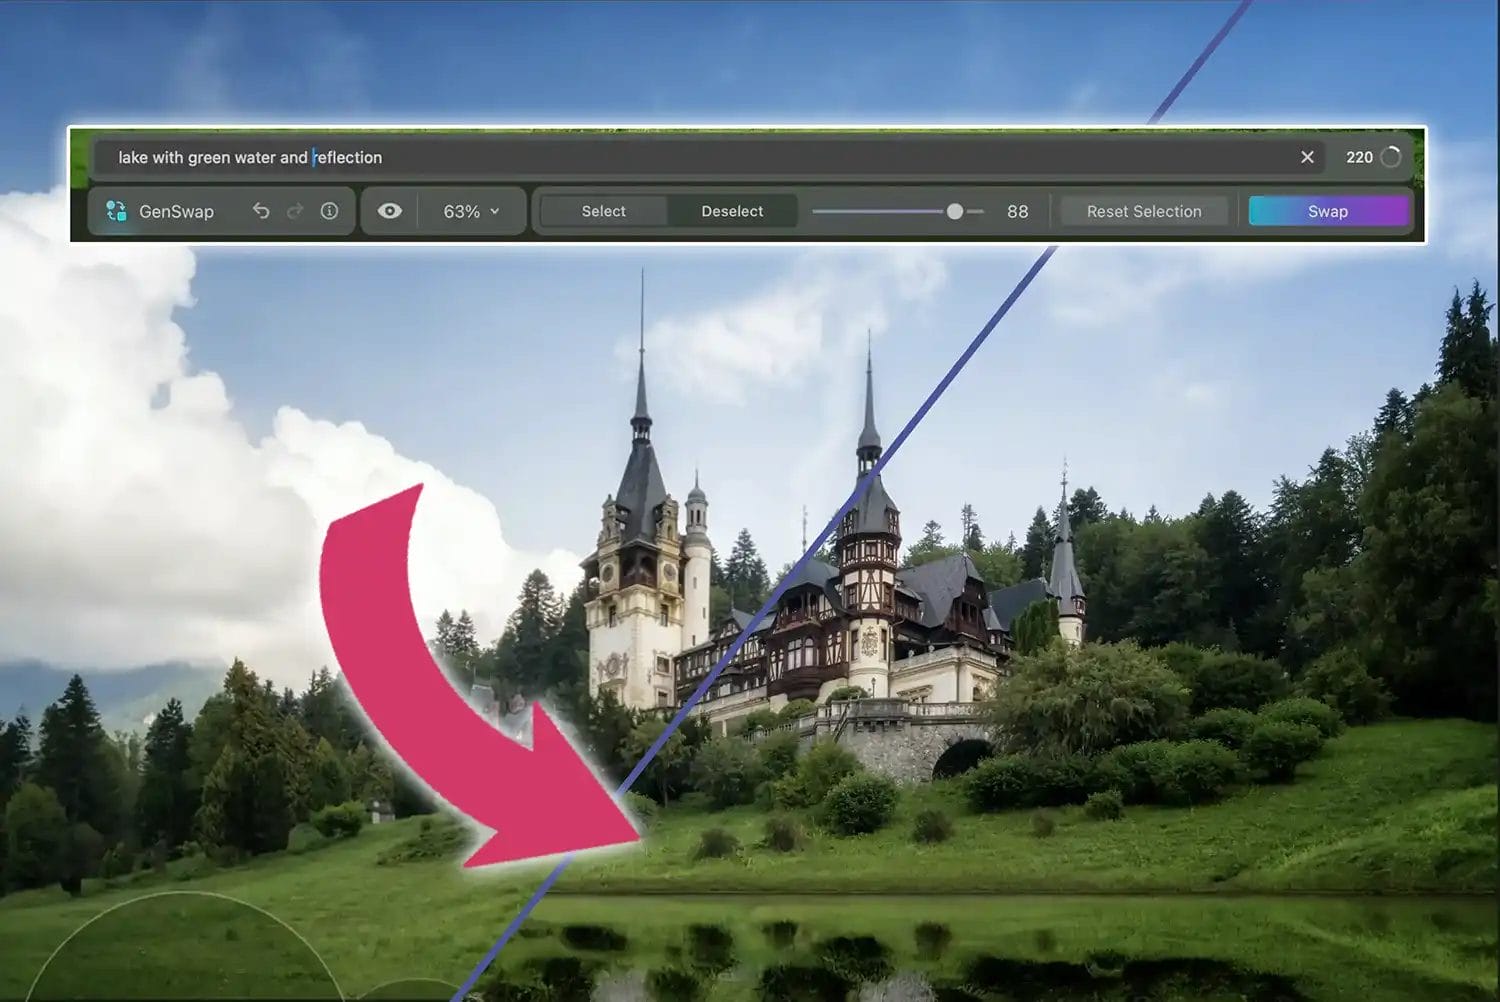 example of how Luminar Neo's GenSwap feature works